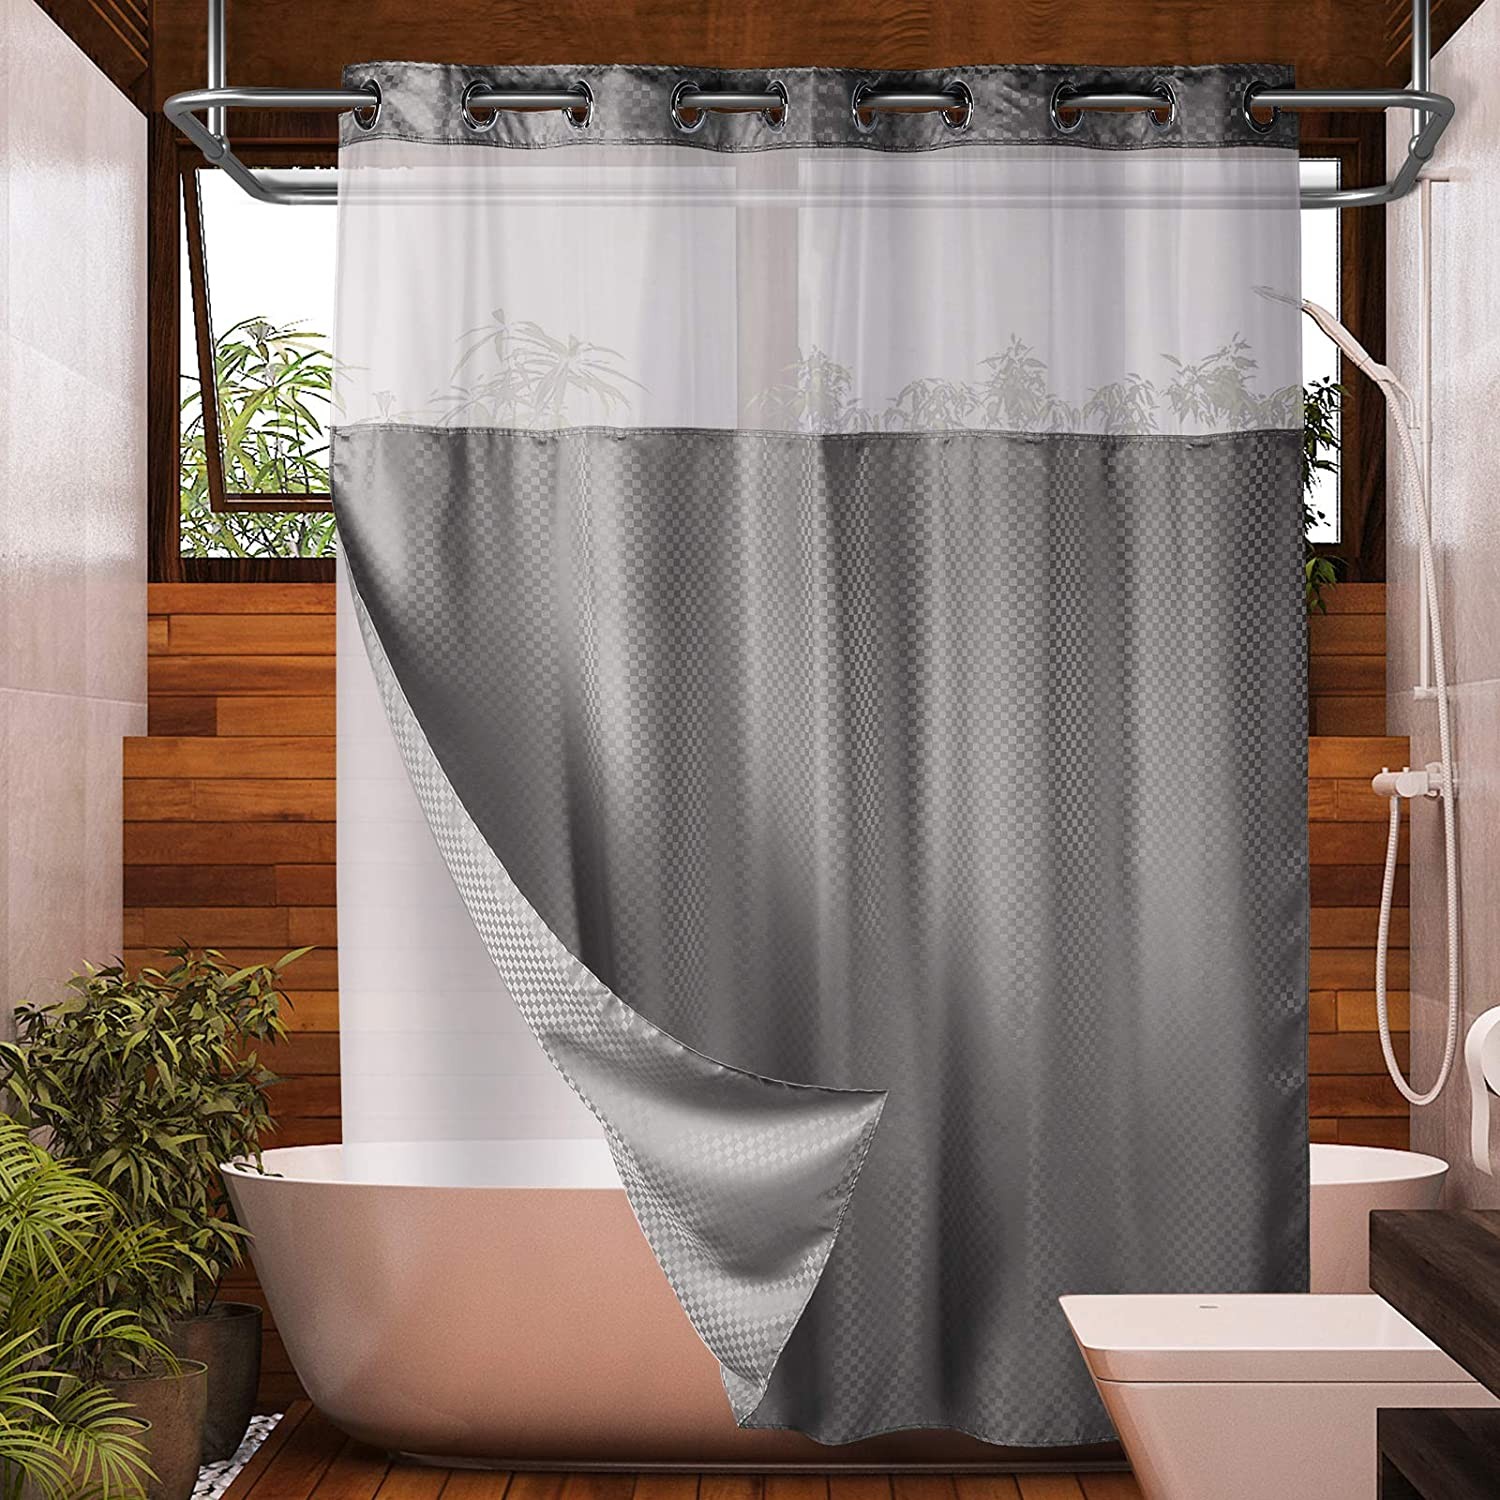 Lagute SnapHook Hook Free Shower Curtain with Snap-in Liner & See Through Top Window - Gray